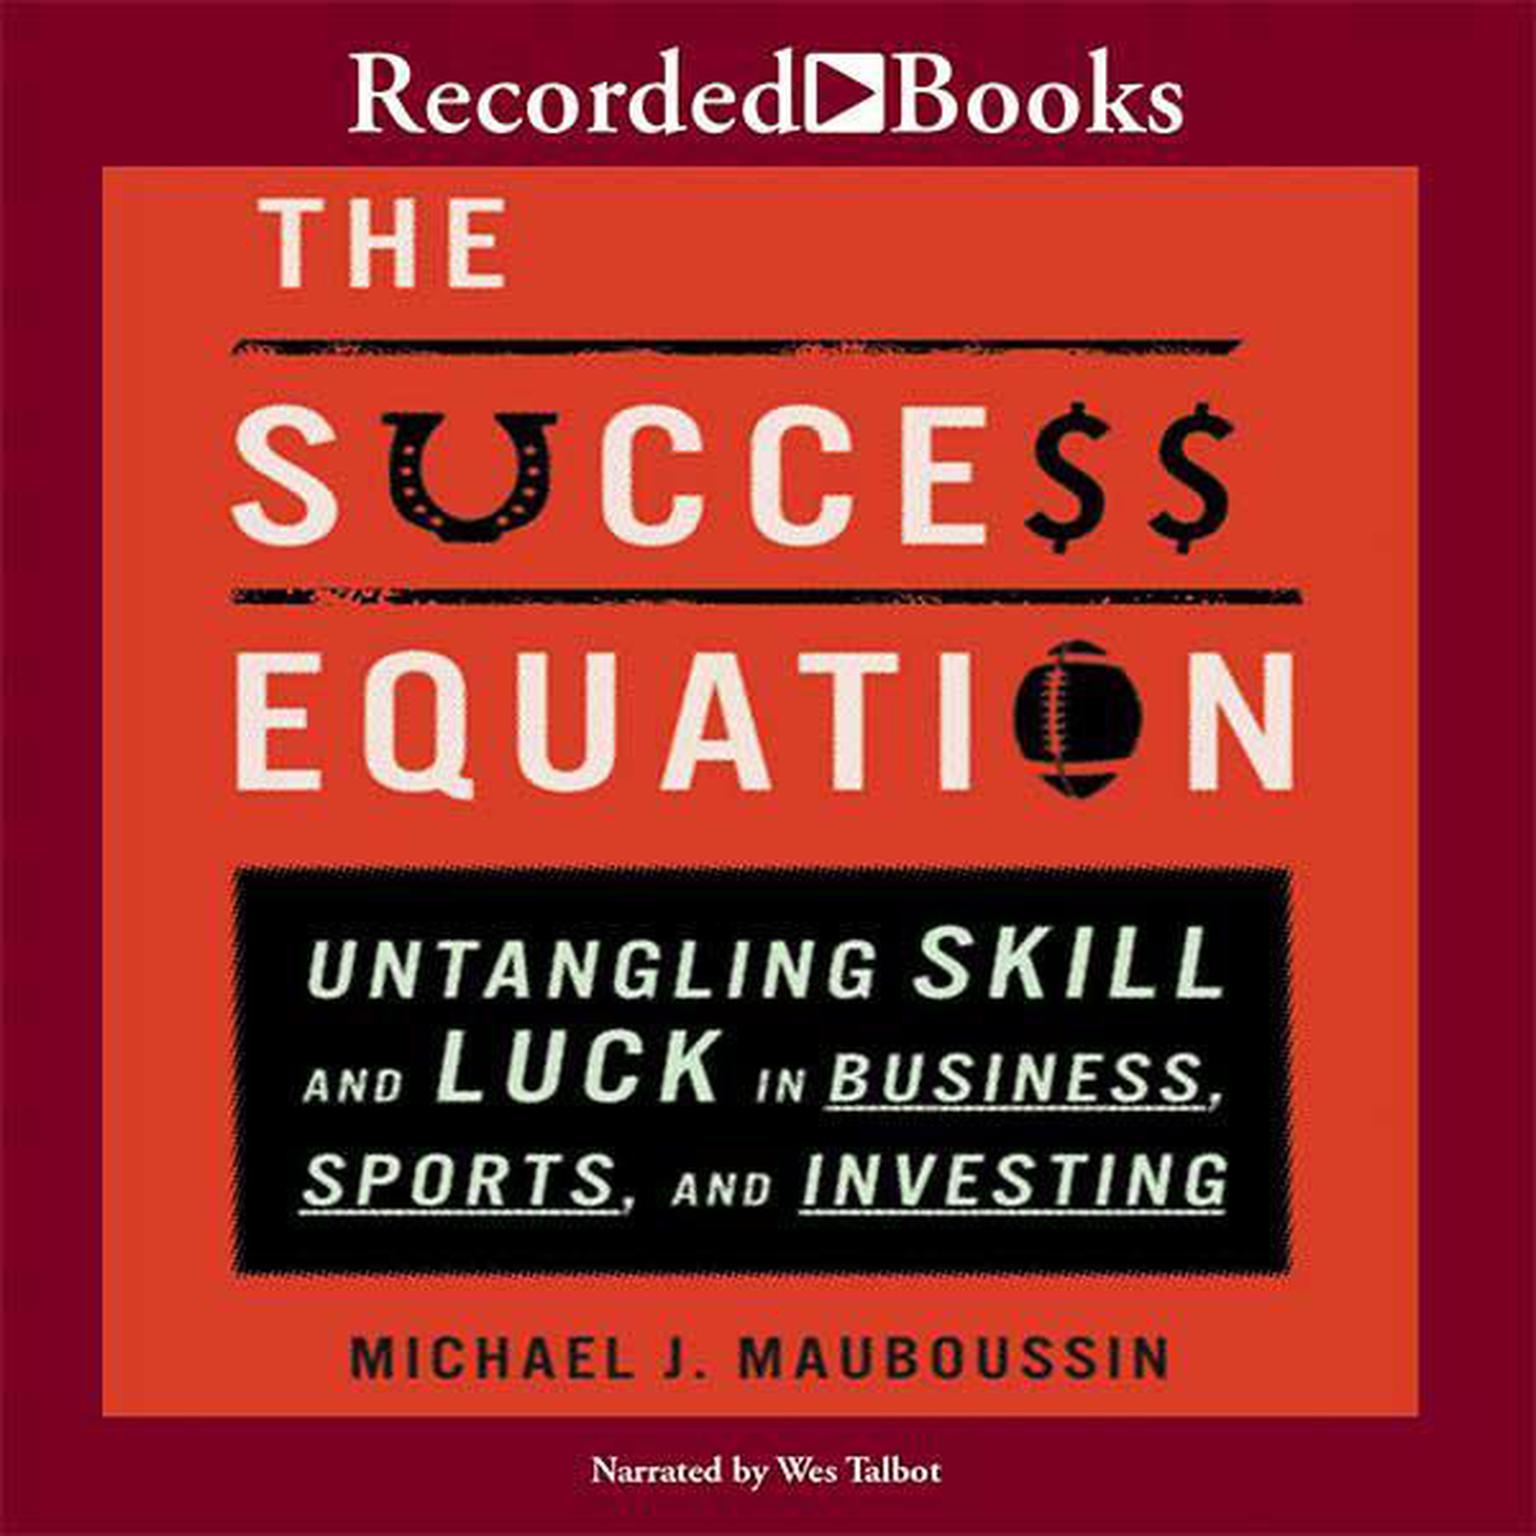 The Success Equation: Untangling Skill and Luck in Business, Sports, and Investing Audiobook, by Michael J. Mauboussin